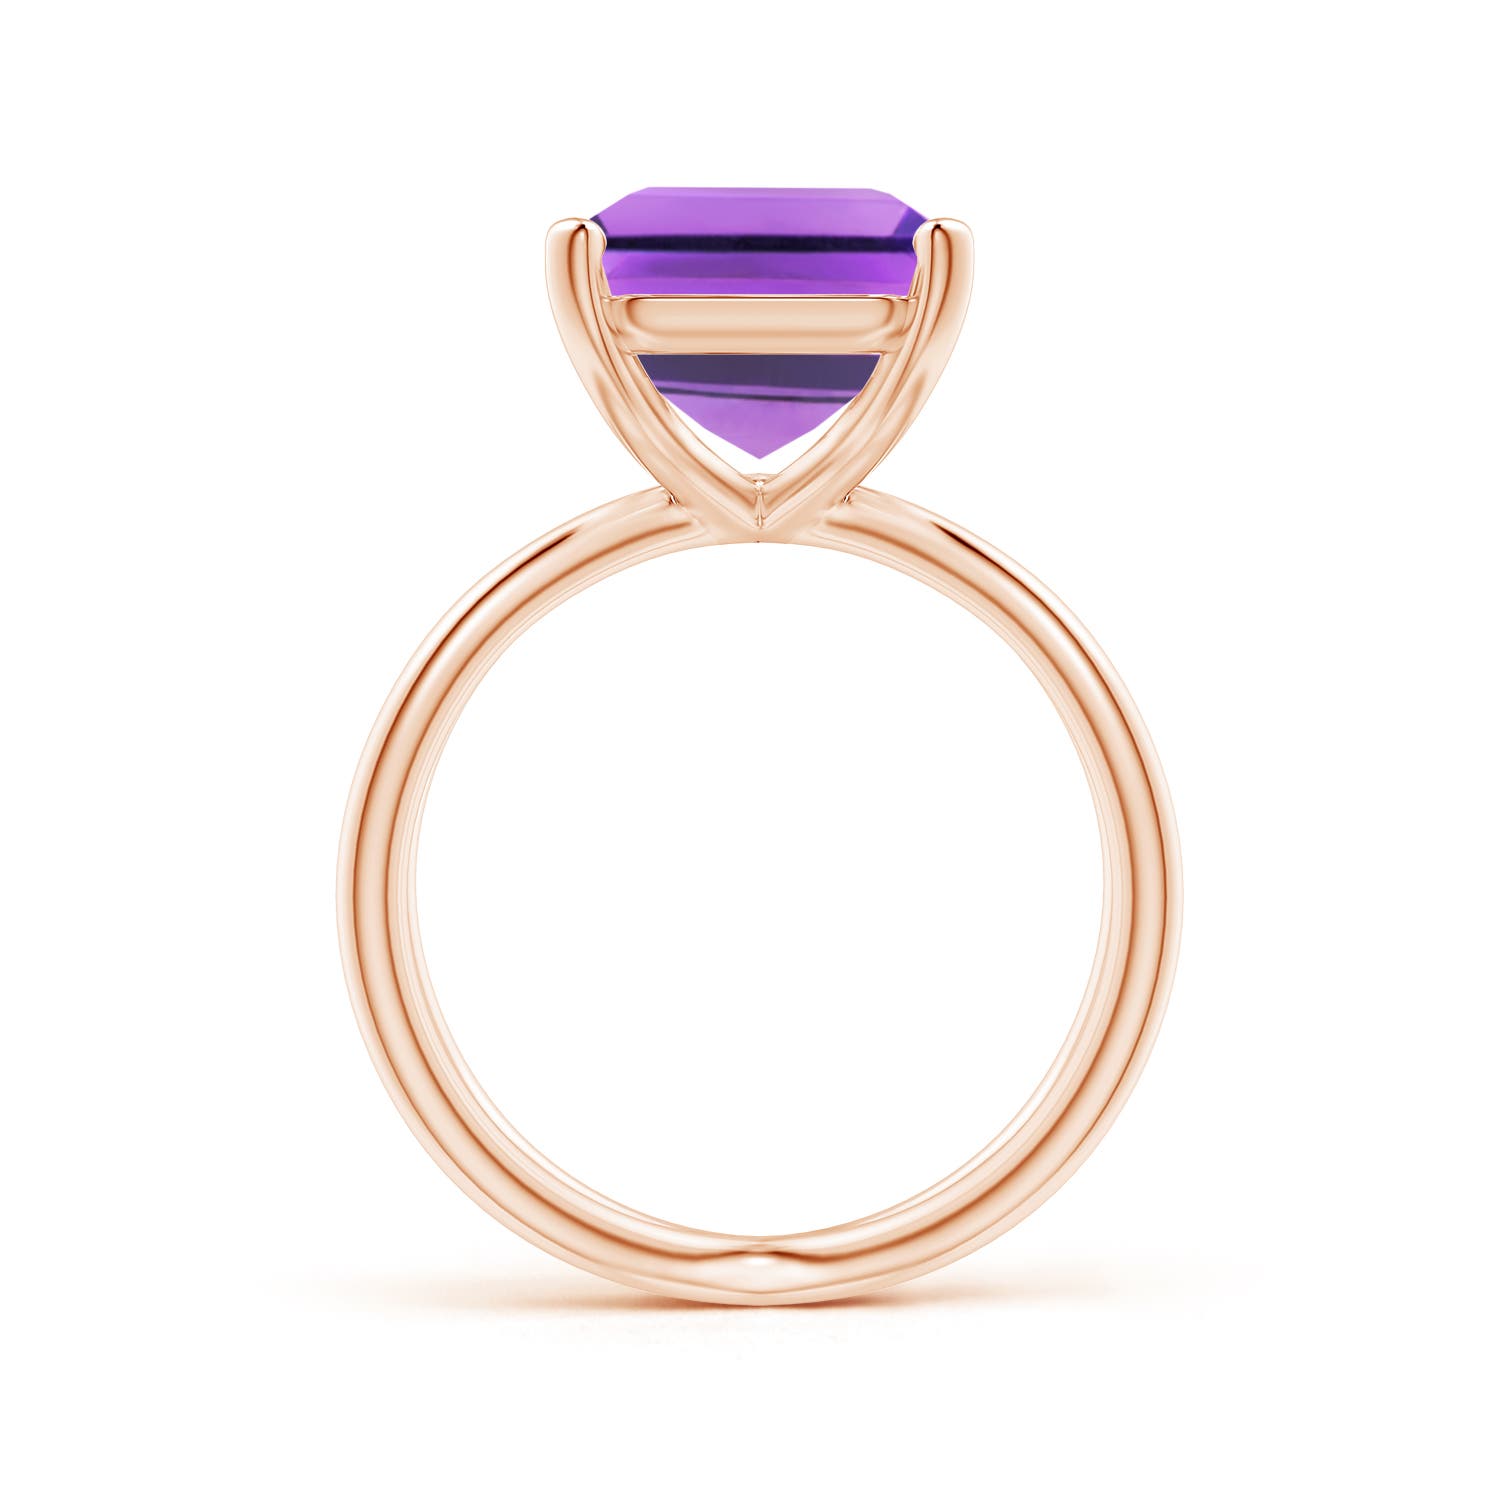 AA - Amethyst / 6.5 CT / 14 KT Rose Gold